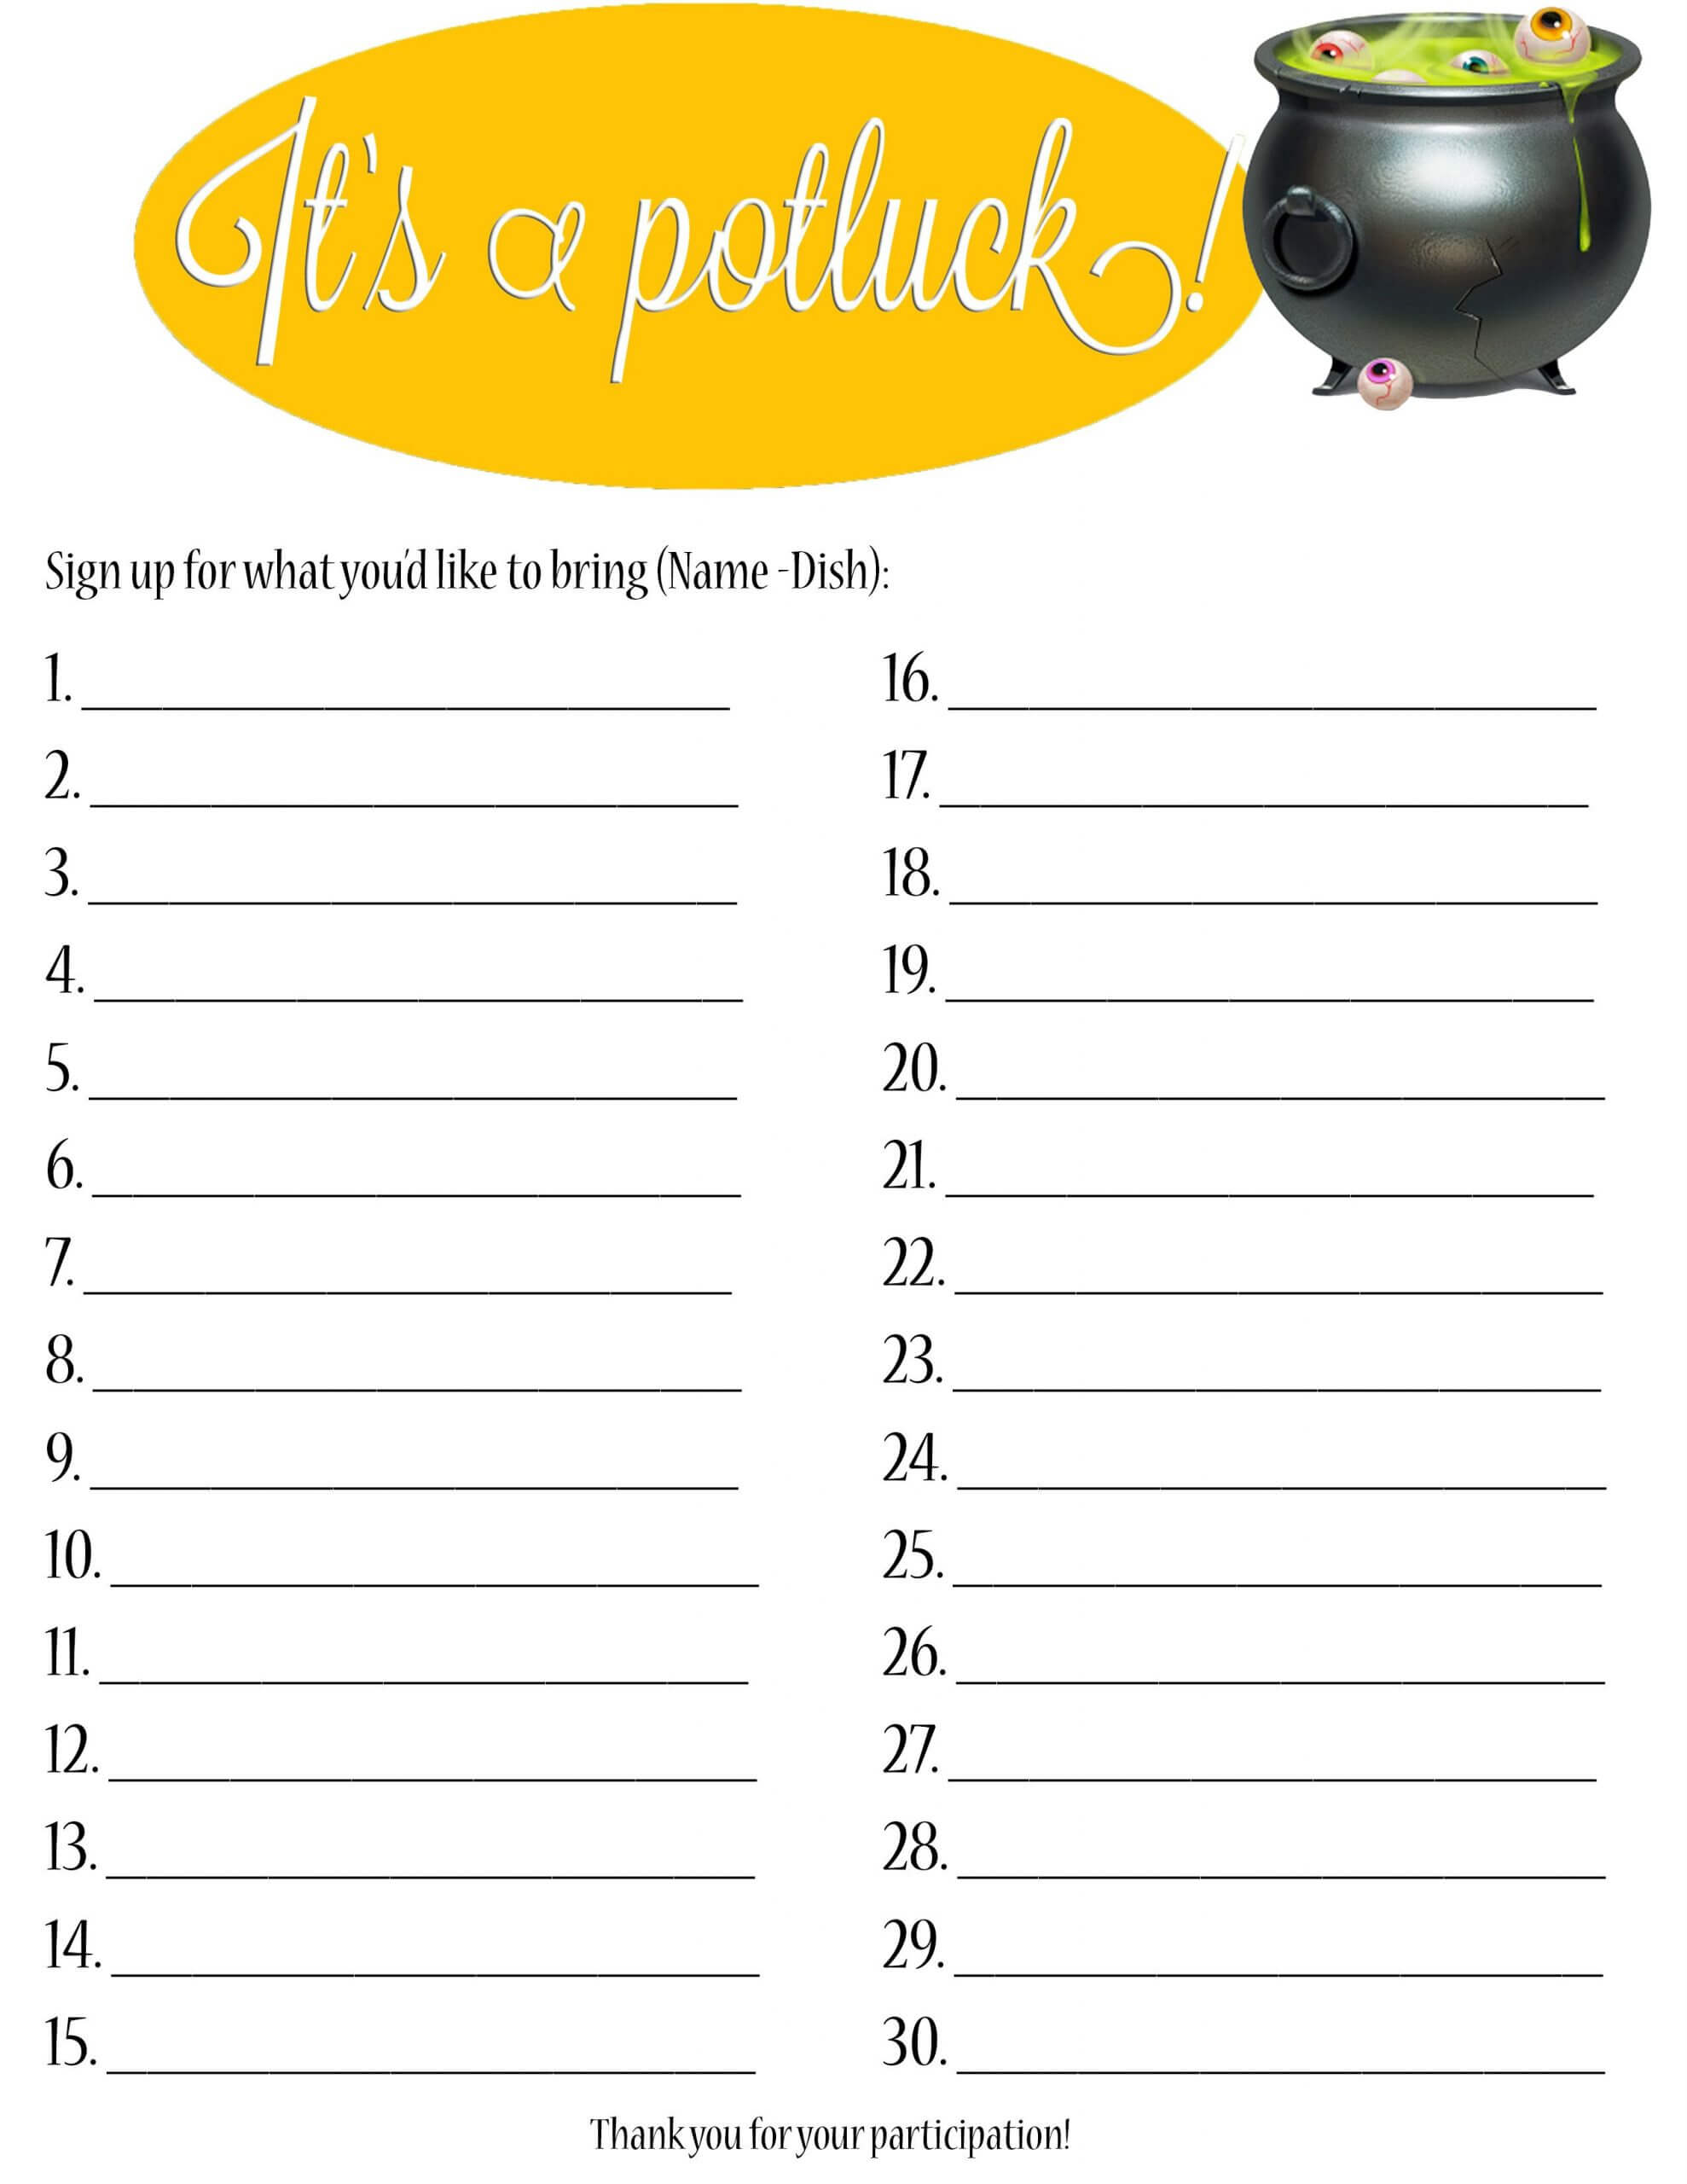 Potluck Signup Sheet Template Word Best Sign Up Sheets For Inside Potluck Signup Sheet Template Word